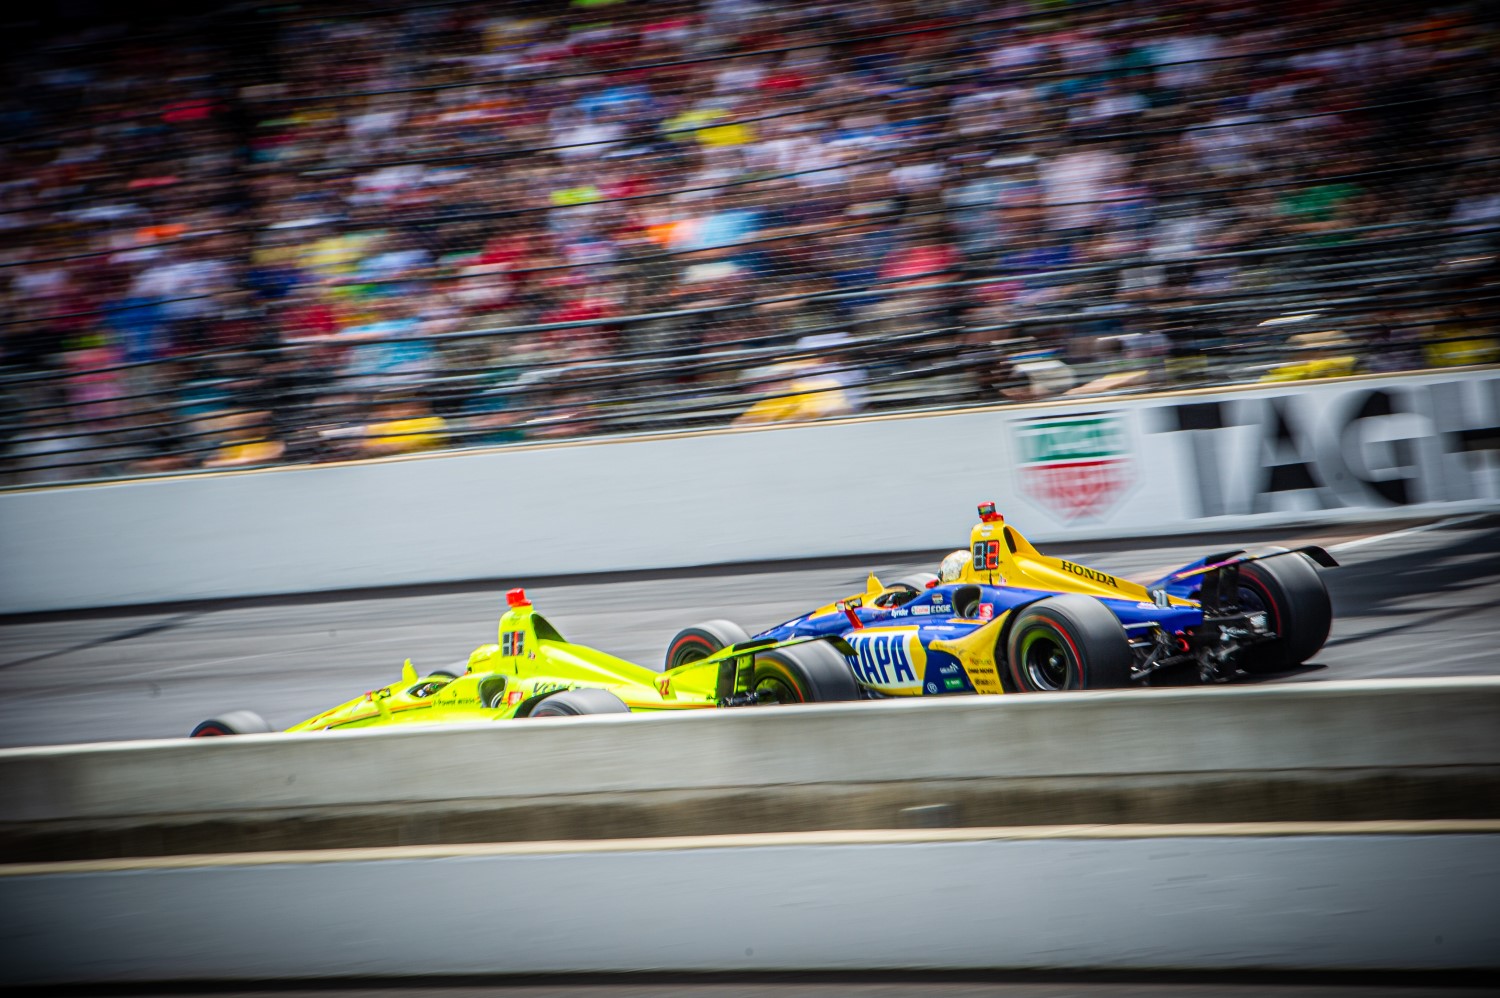 Pagenaud and Rossi put on a show at Indy